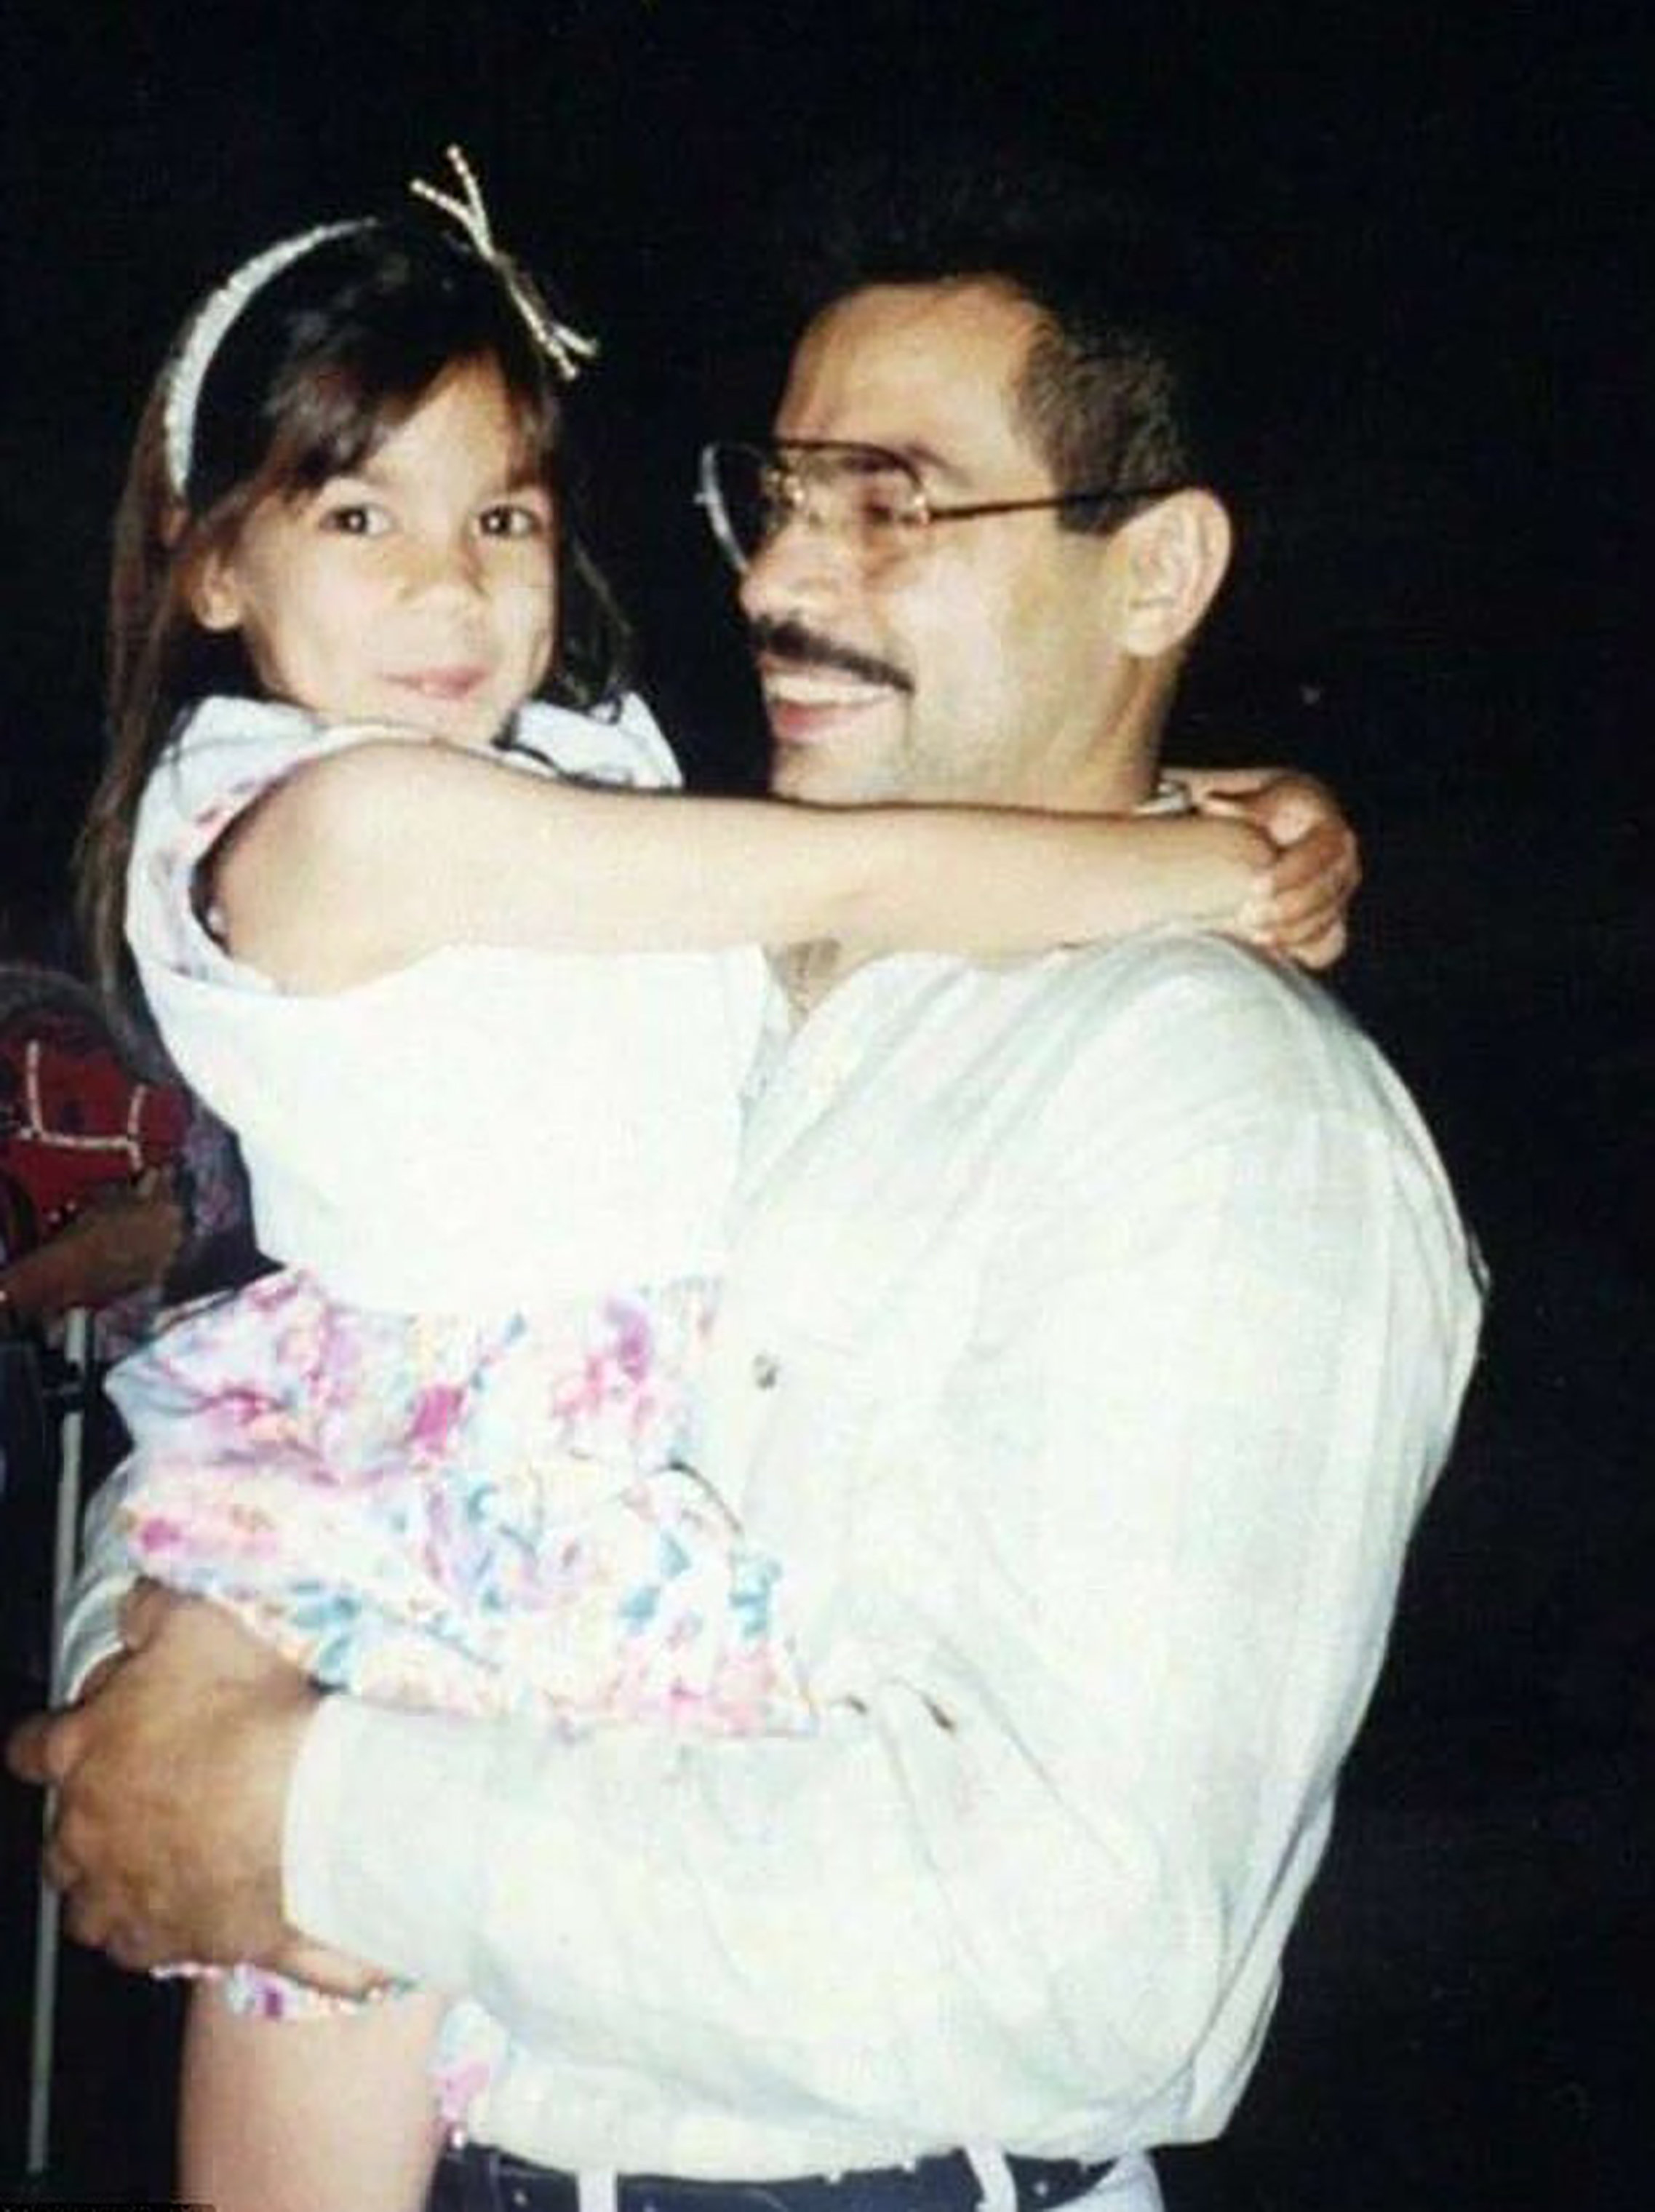 Her gregarious dad was her introduction to community organizing, she recalls. He died when she was in college. (Courtesy Ocasio-Cortez)